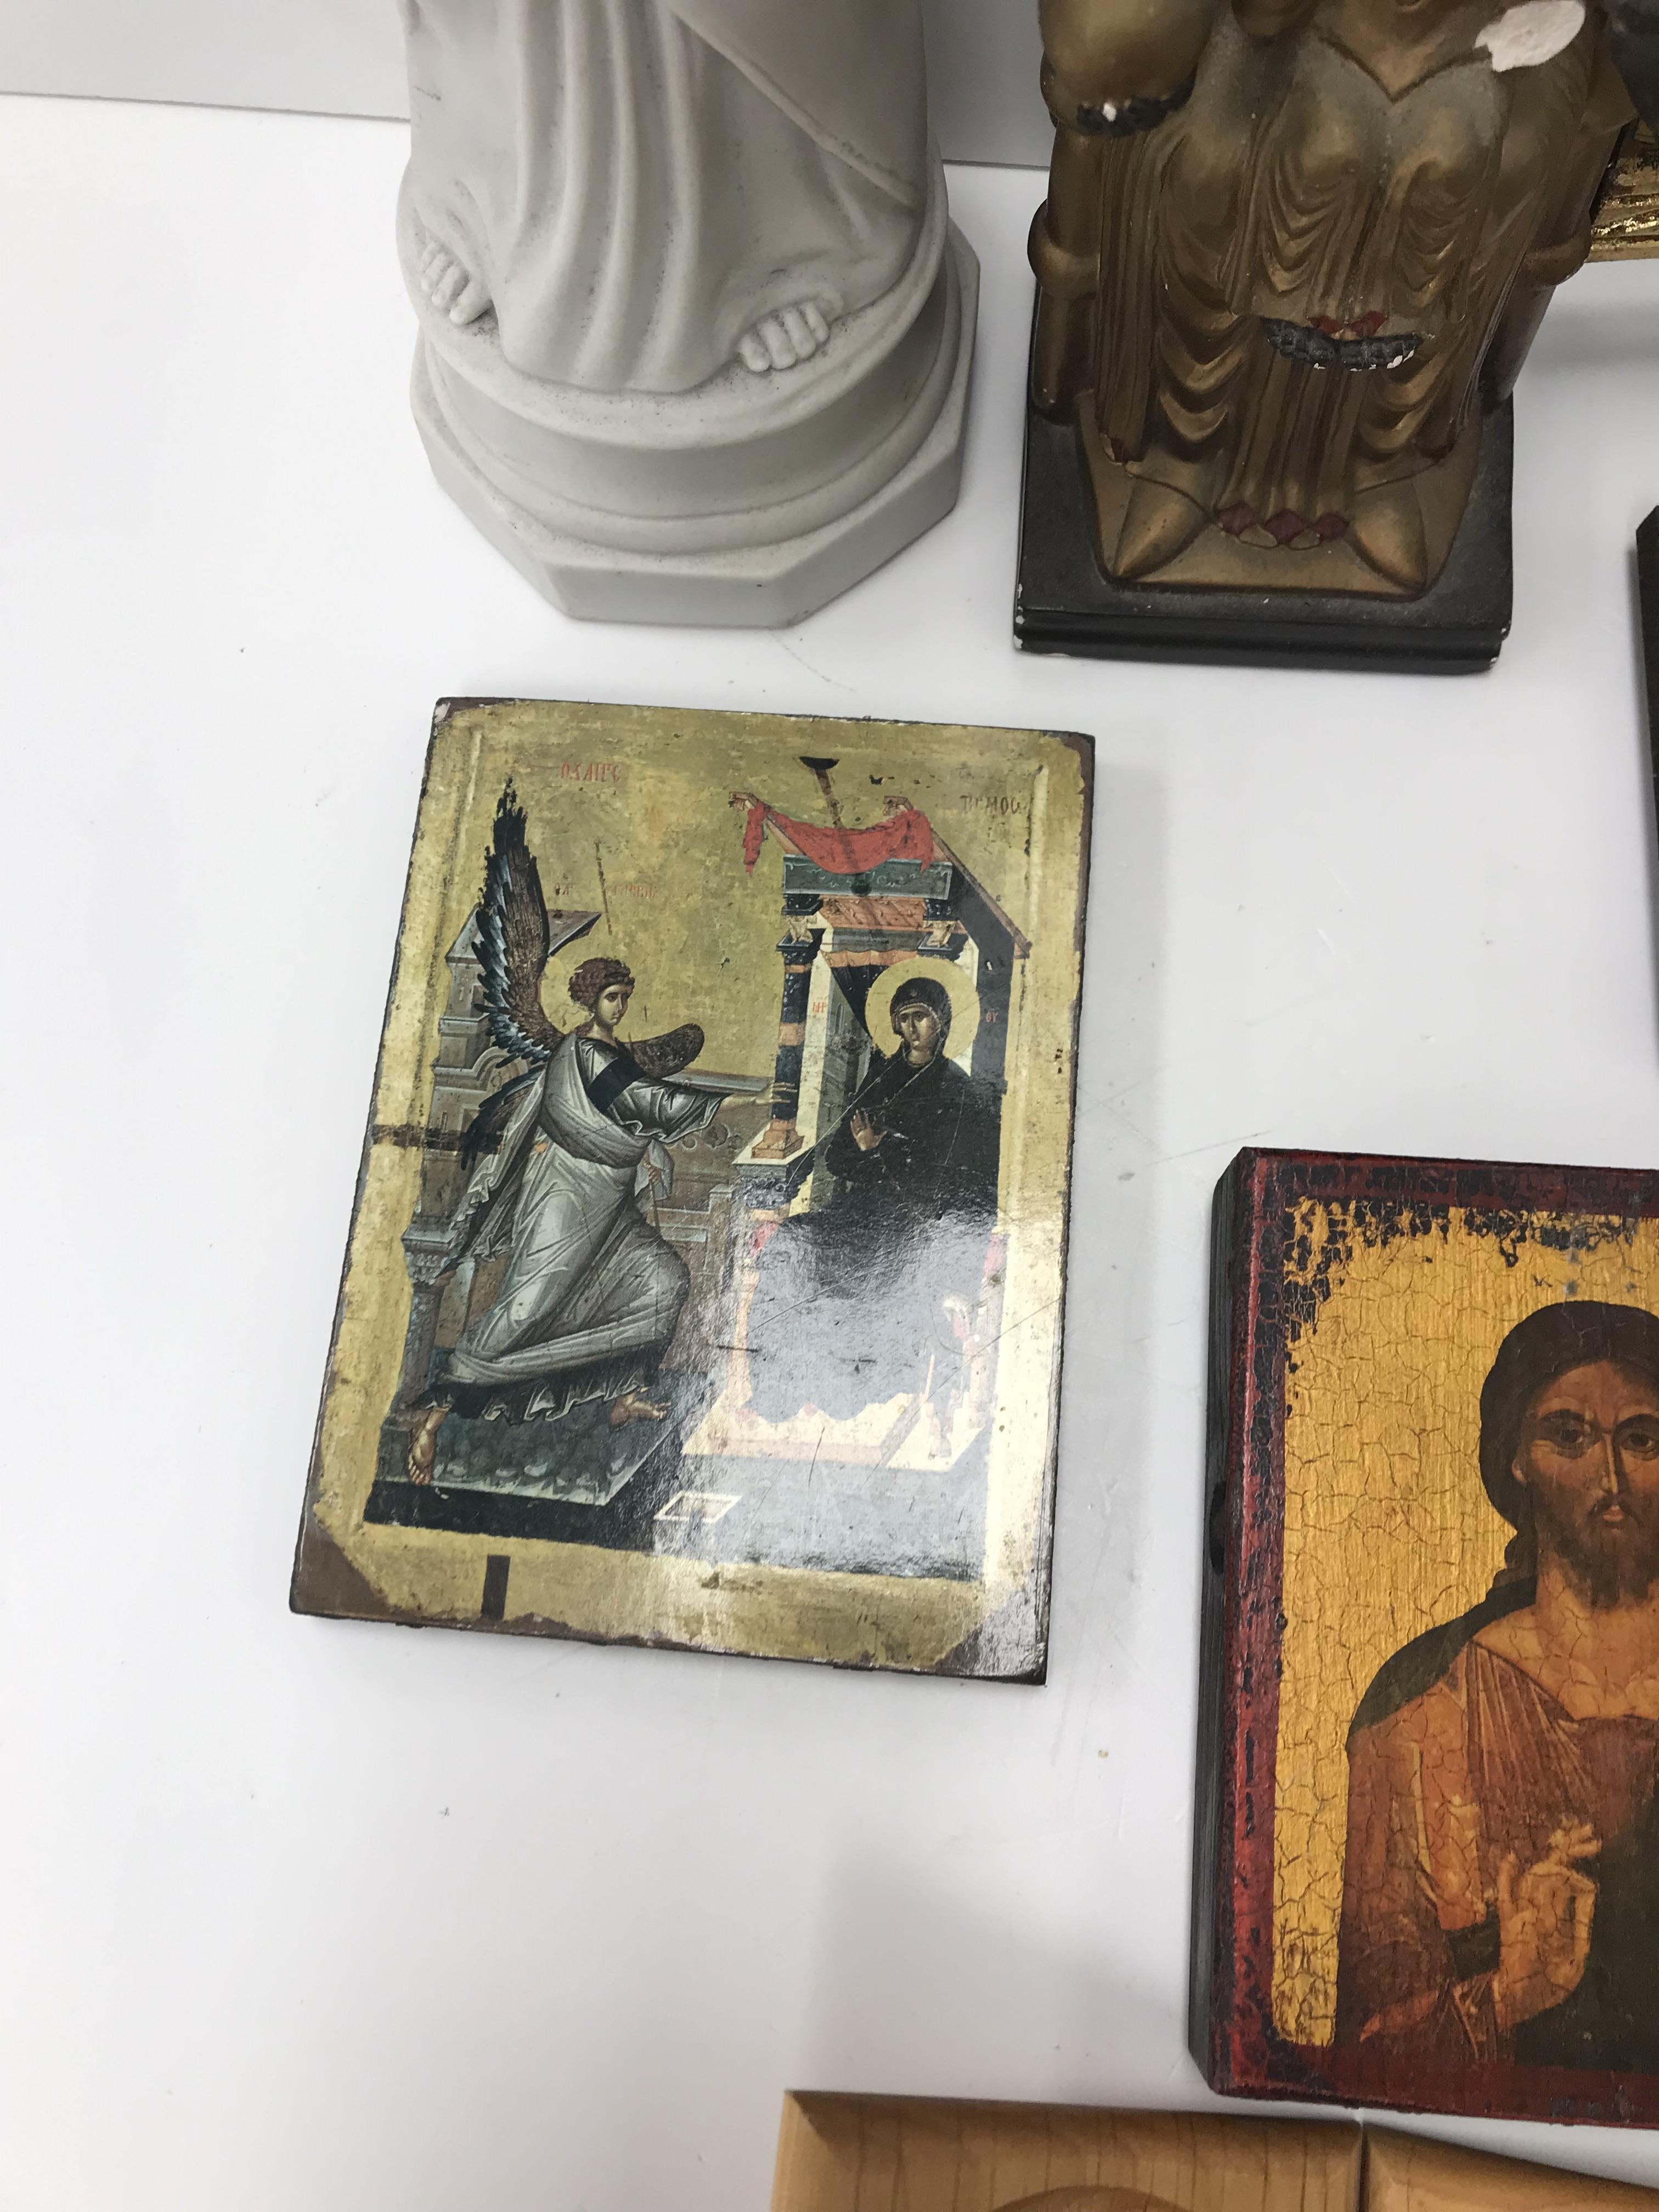 A box of various religious artefacts including a blanc de chine figure of "The Virgin Mary", - Bild 4 aus 4